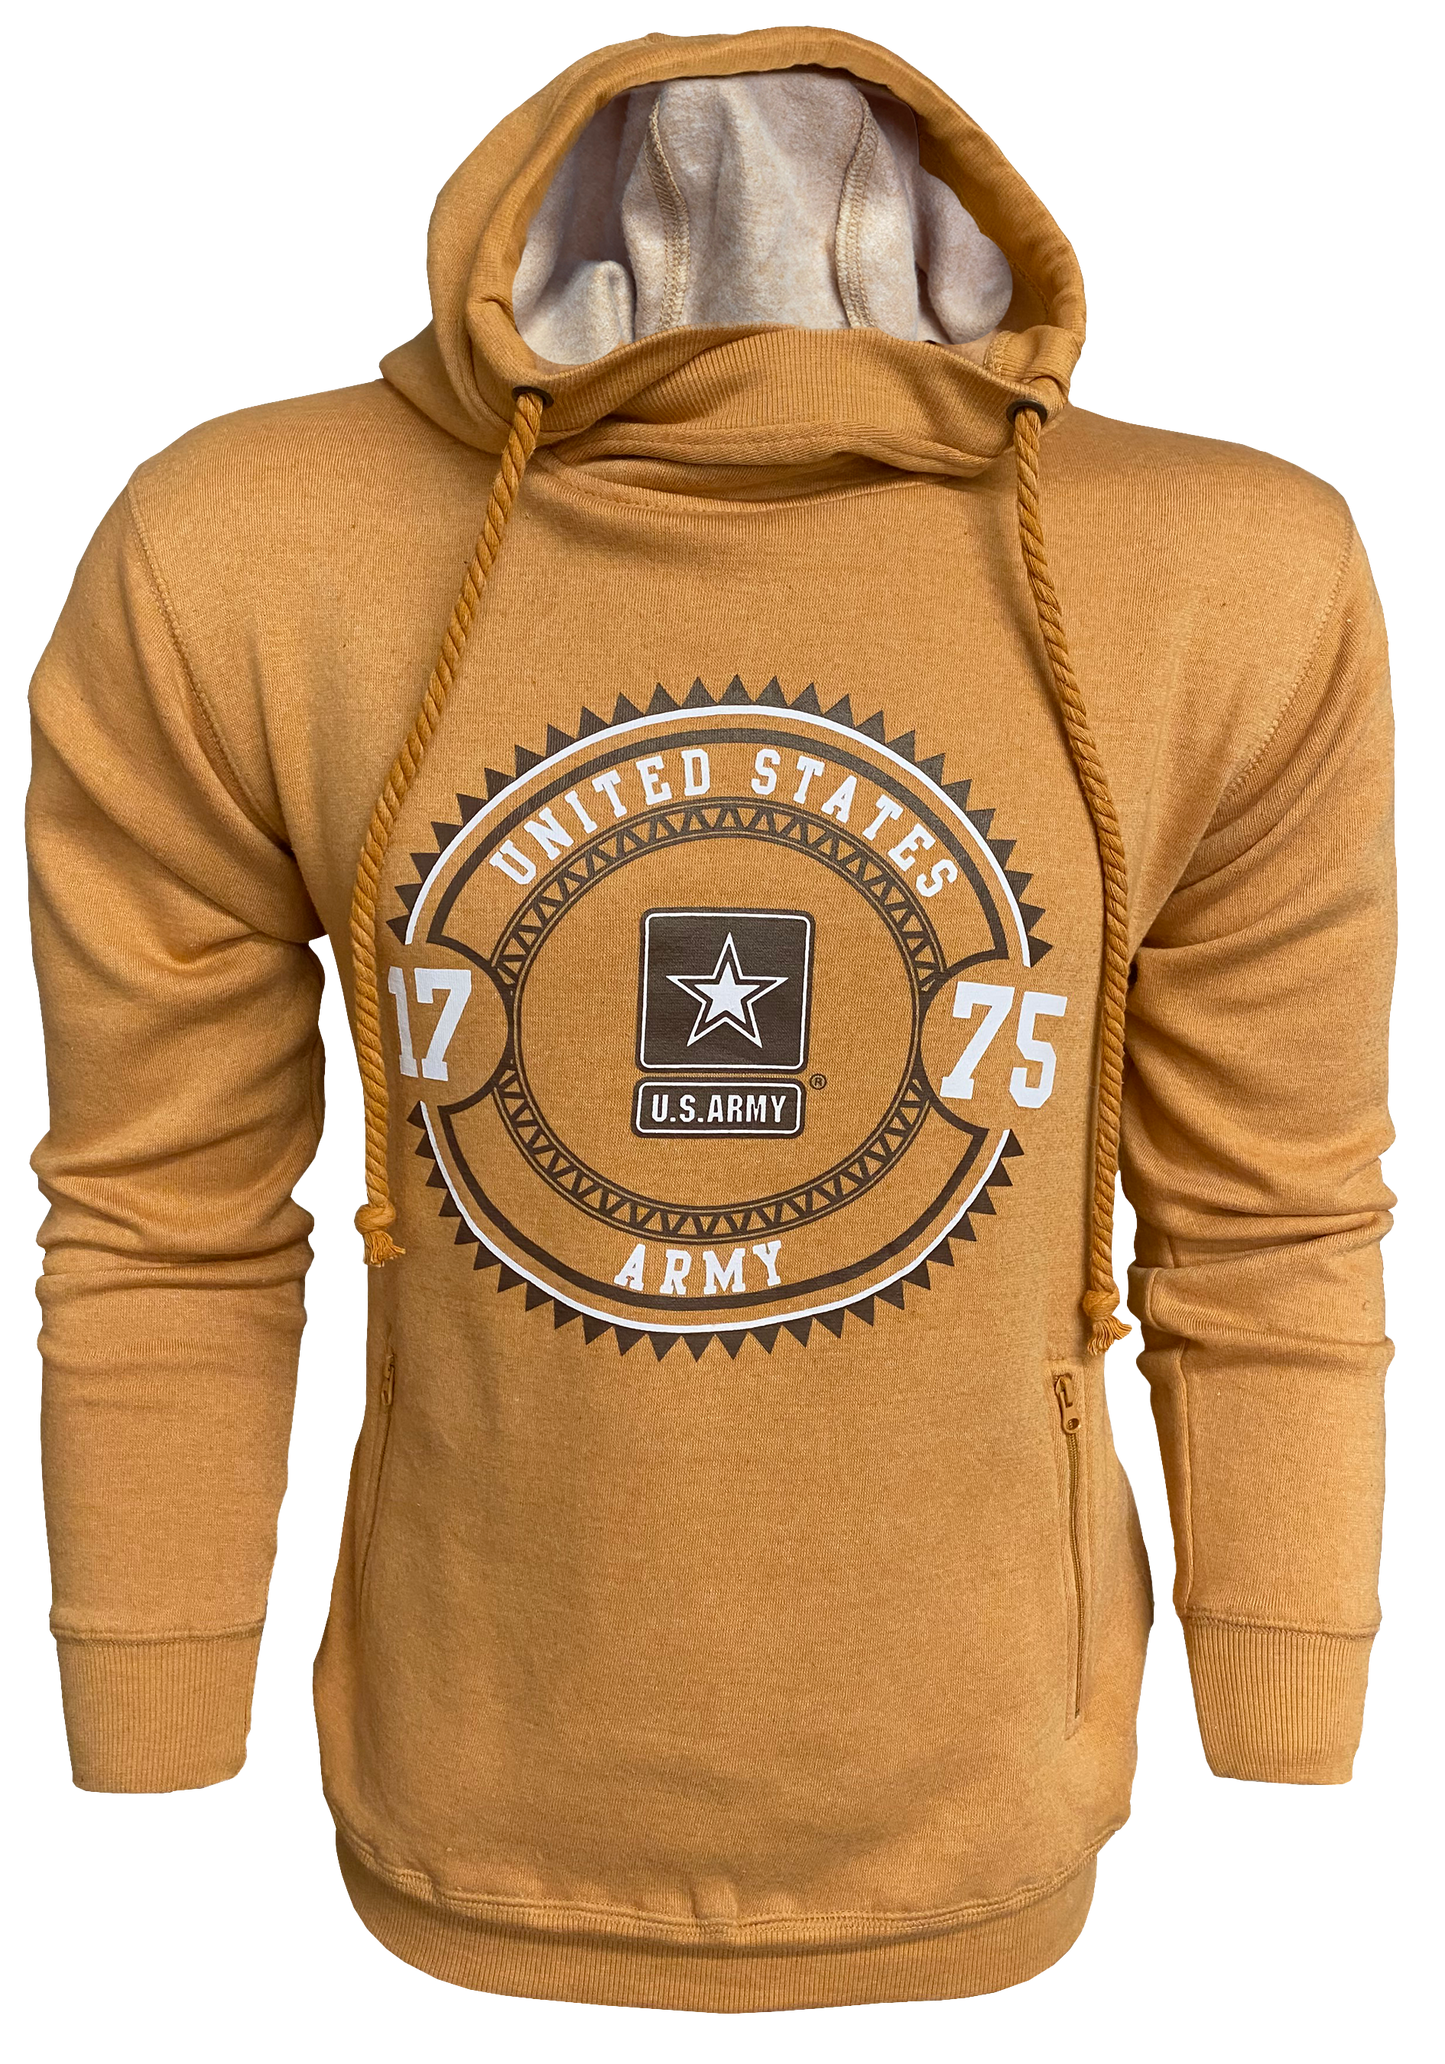 United States Army on Fleece Pullover